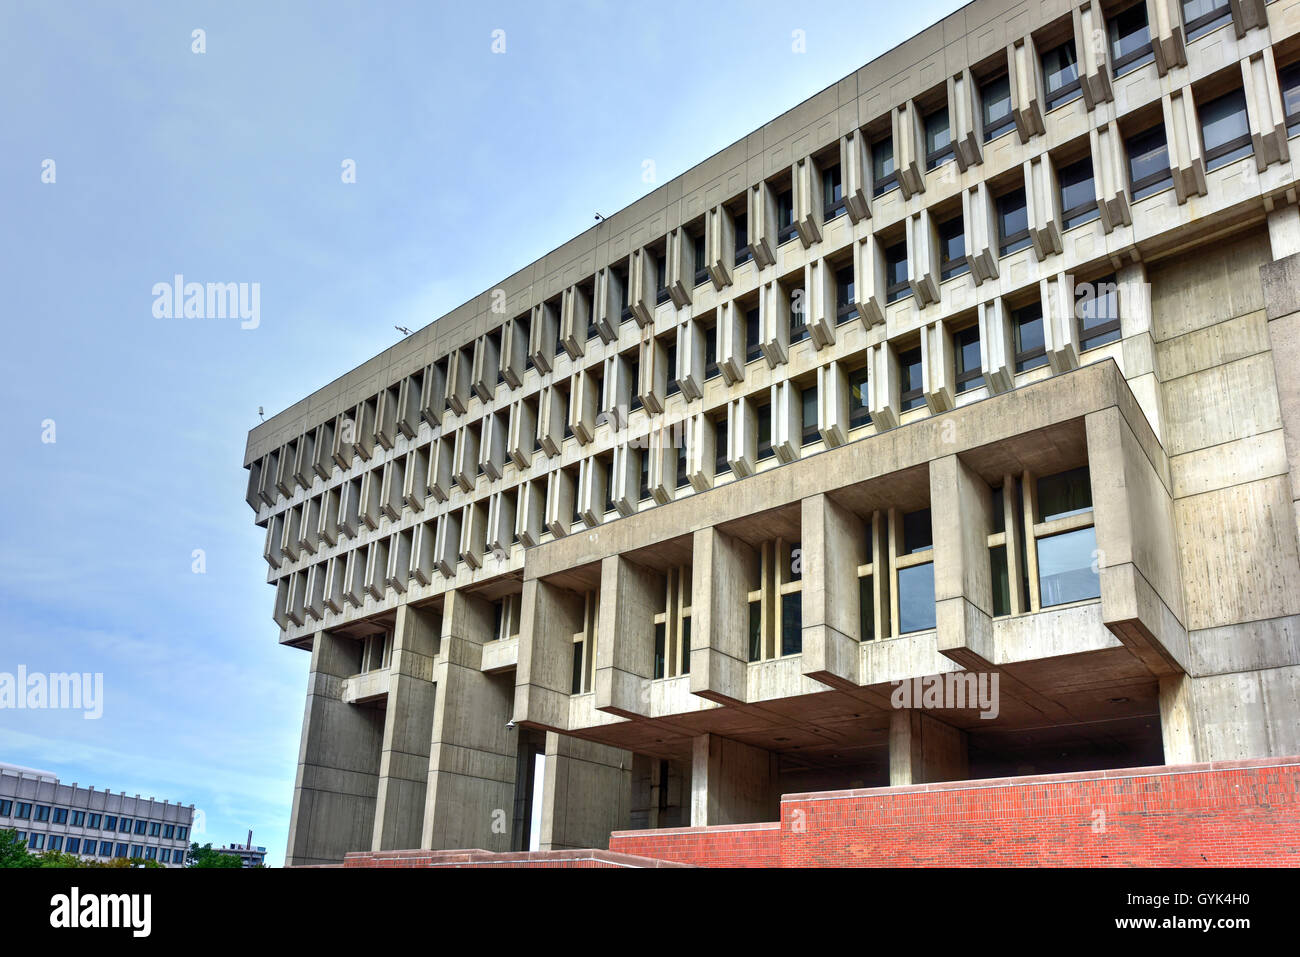 Boston City Hall in Government Center. The current hall was built in 1968 and is a controversial and prominent example of the br Stock Photo